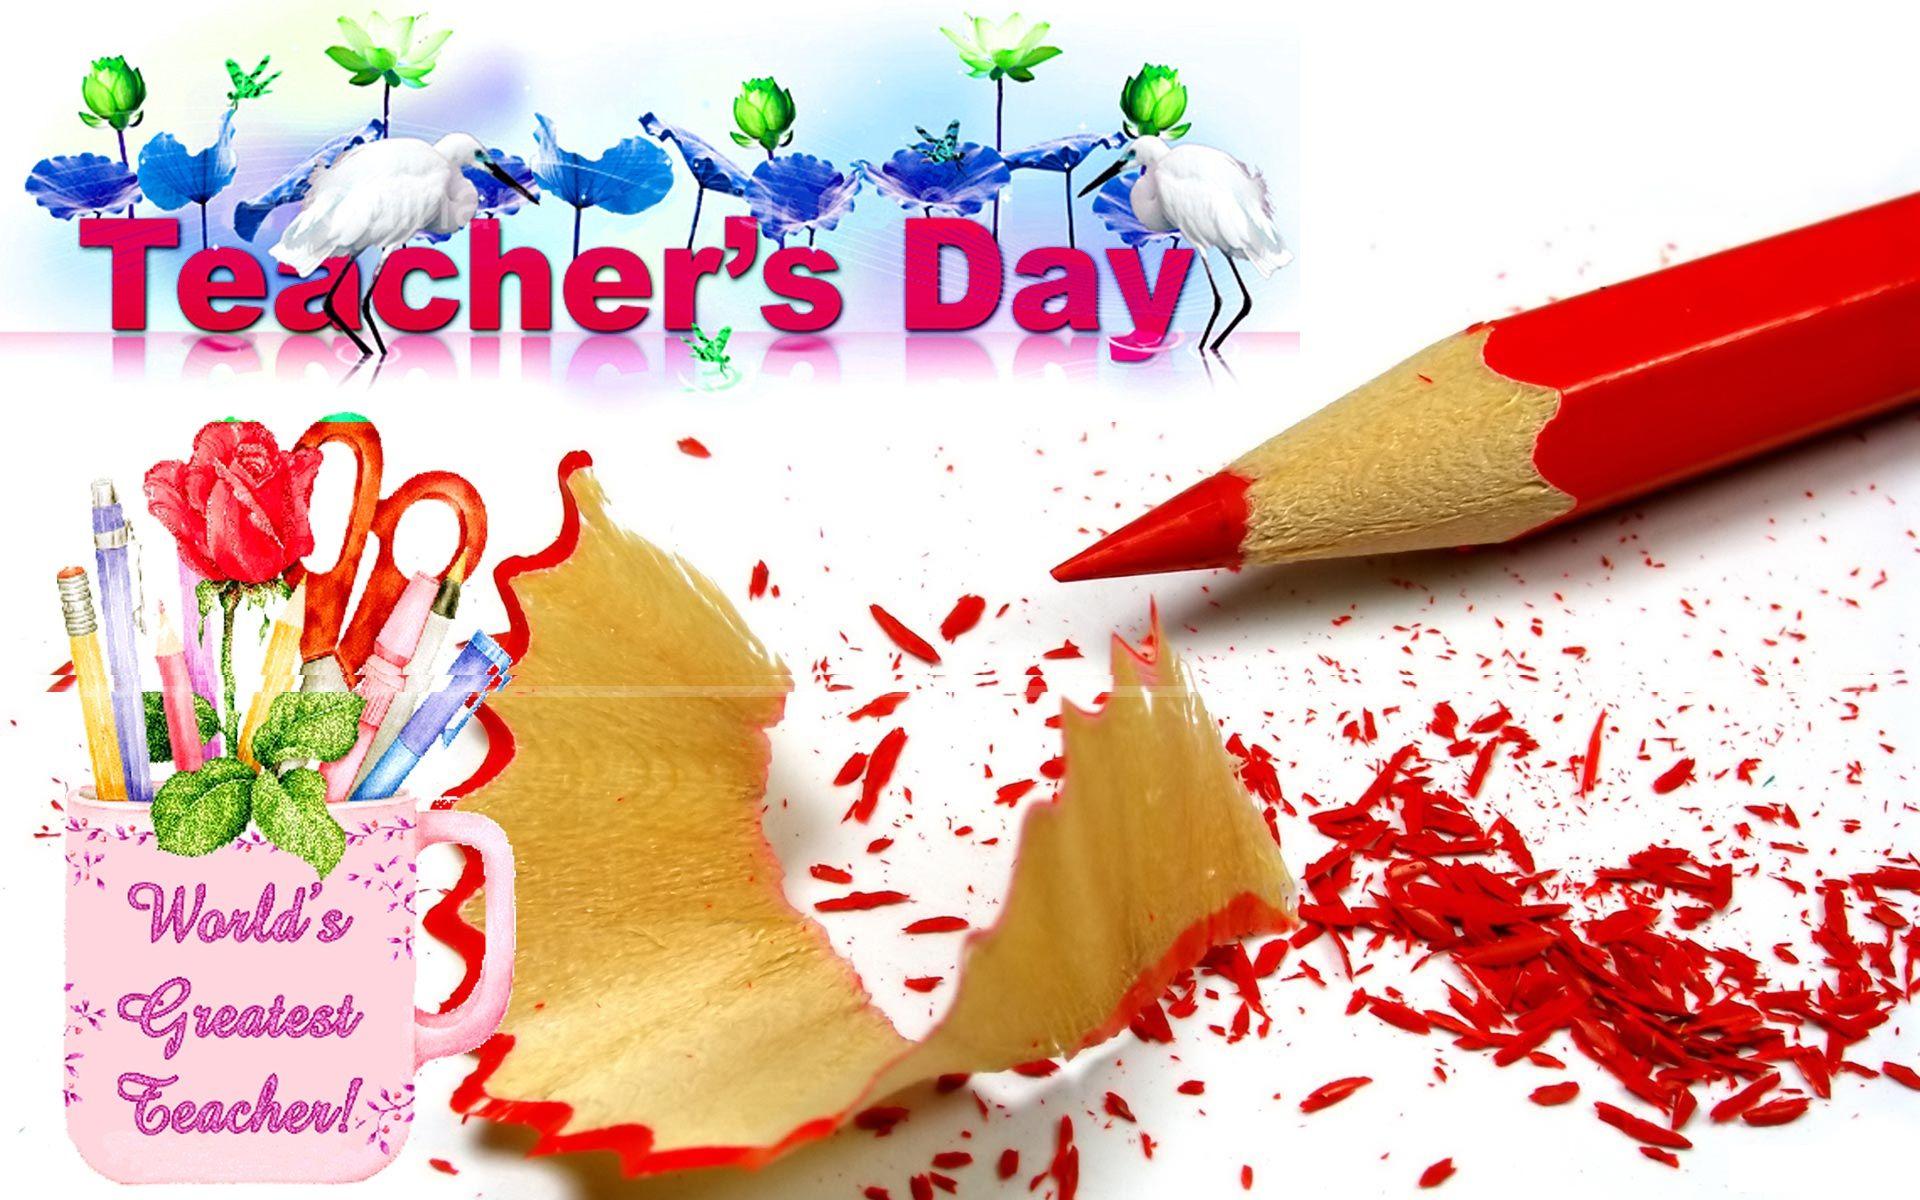 Happy Teachers Day HD Image, Wallpaper, Pics, and Photo (Free Download)